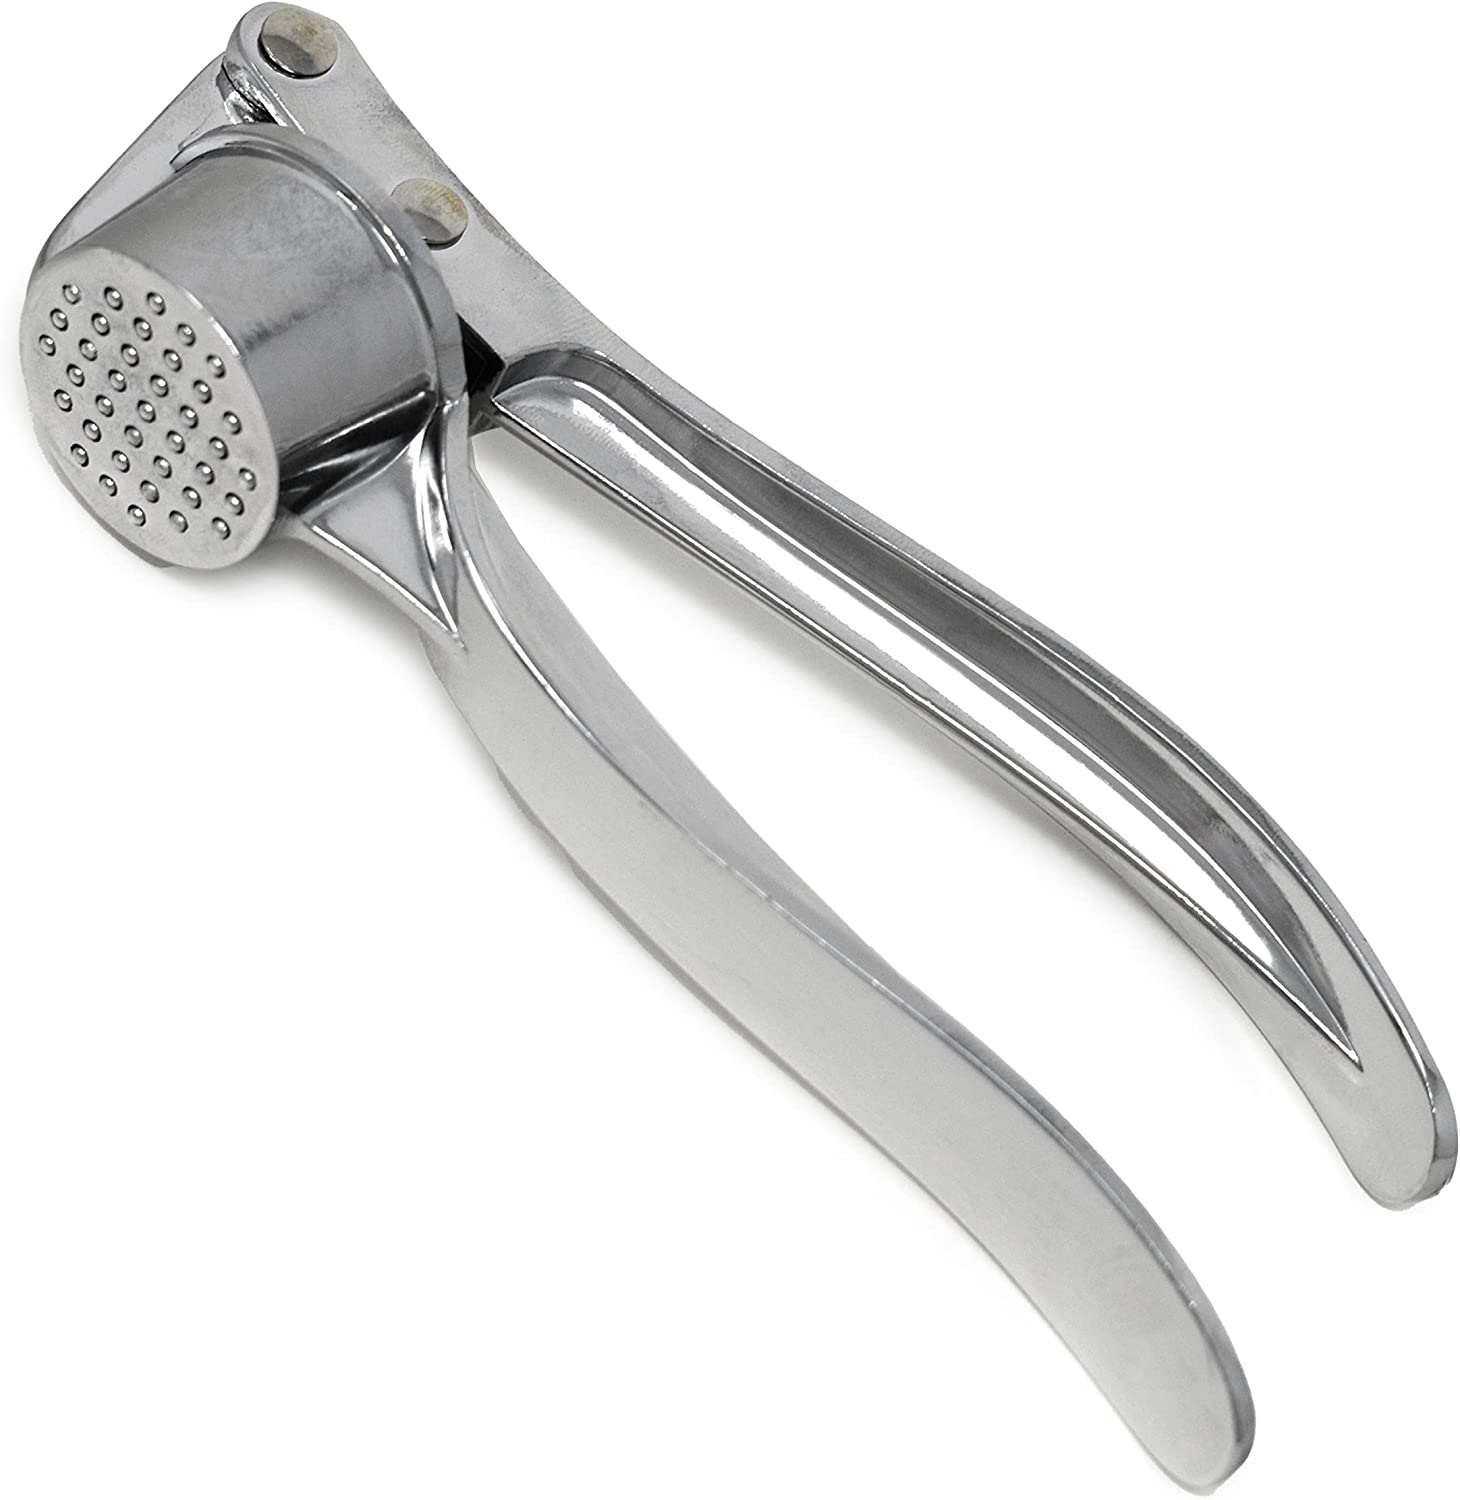 Norpro Garlic Press Import To Shop ×Product customization General Description Gallery Reviews Variations Specification Products